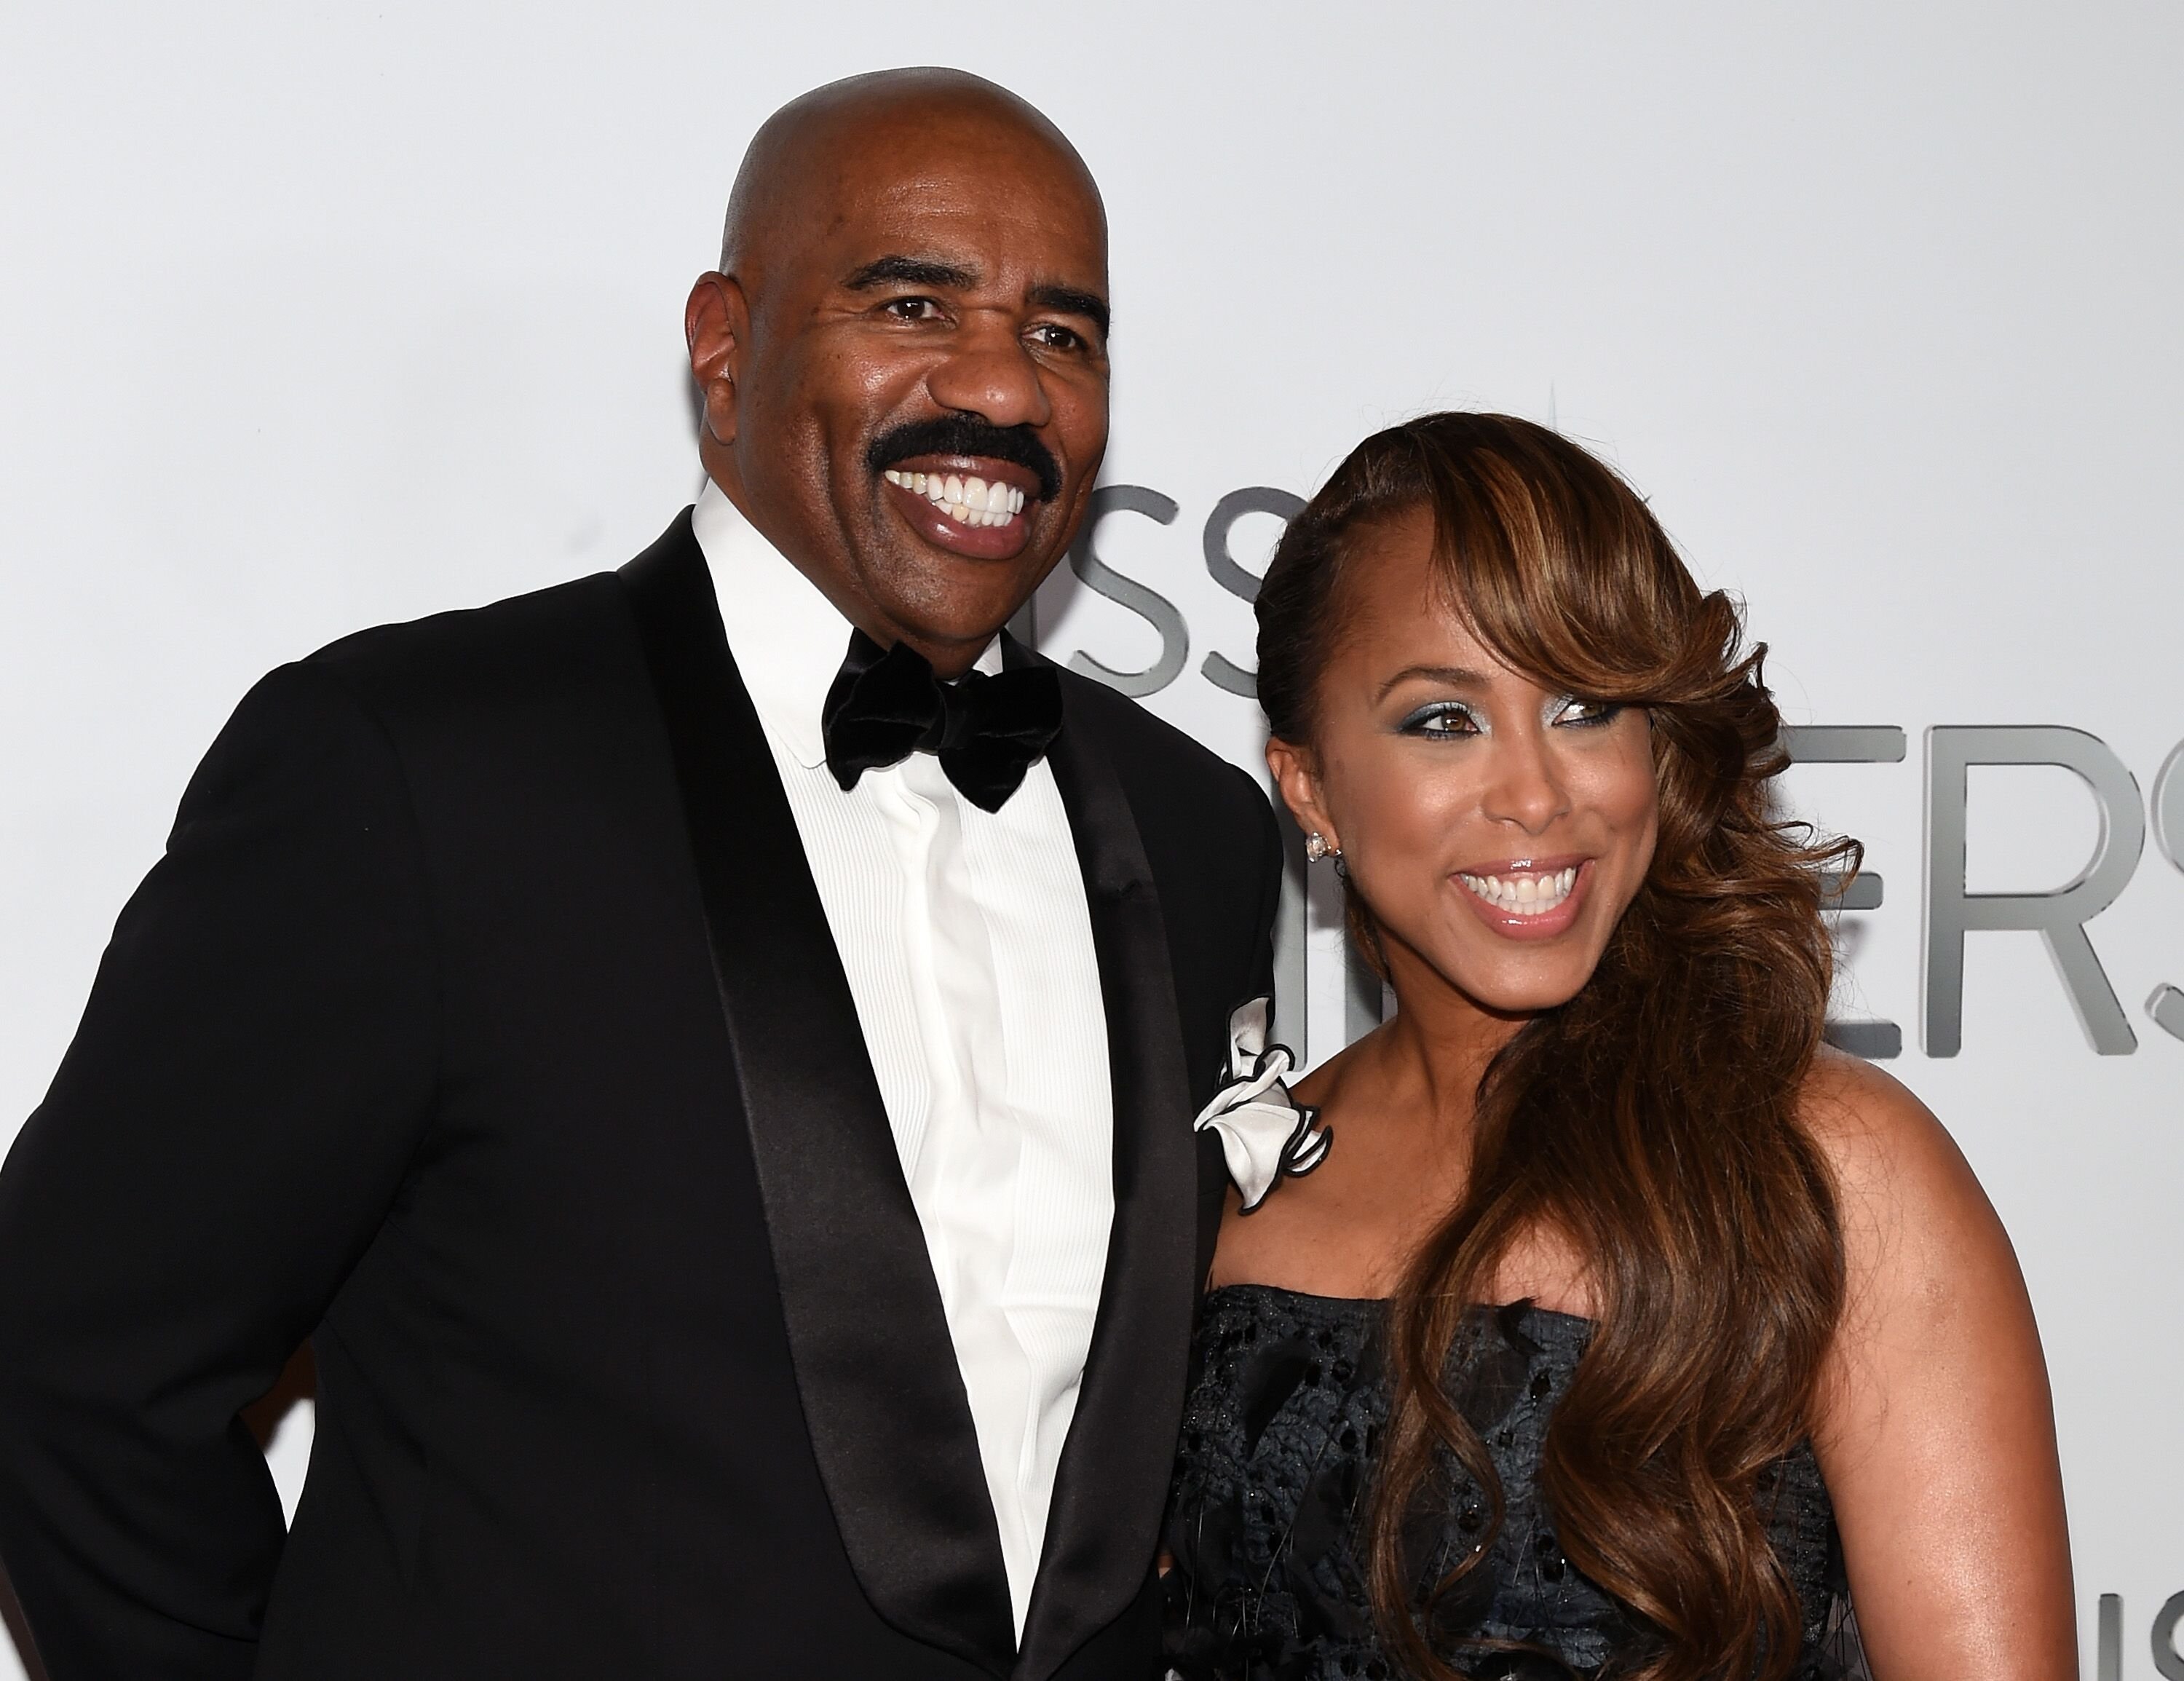 Steve Harvey and his wife Marjorie Harvey at the 2015 Miss Universe Pageant in Las Vegas | Source: Getty Images